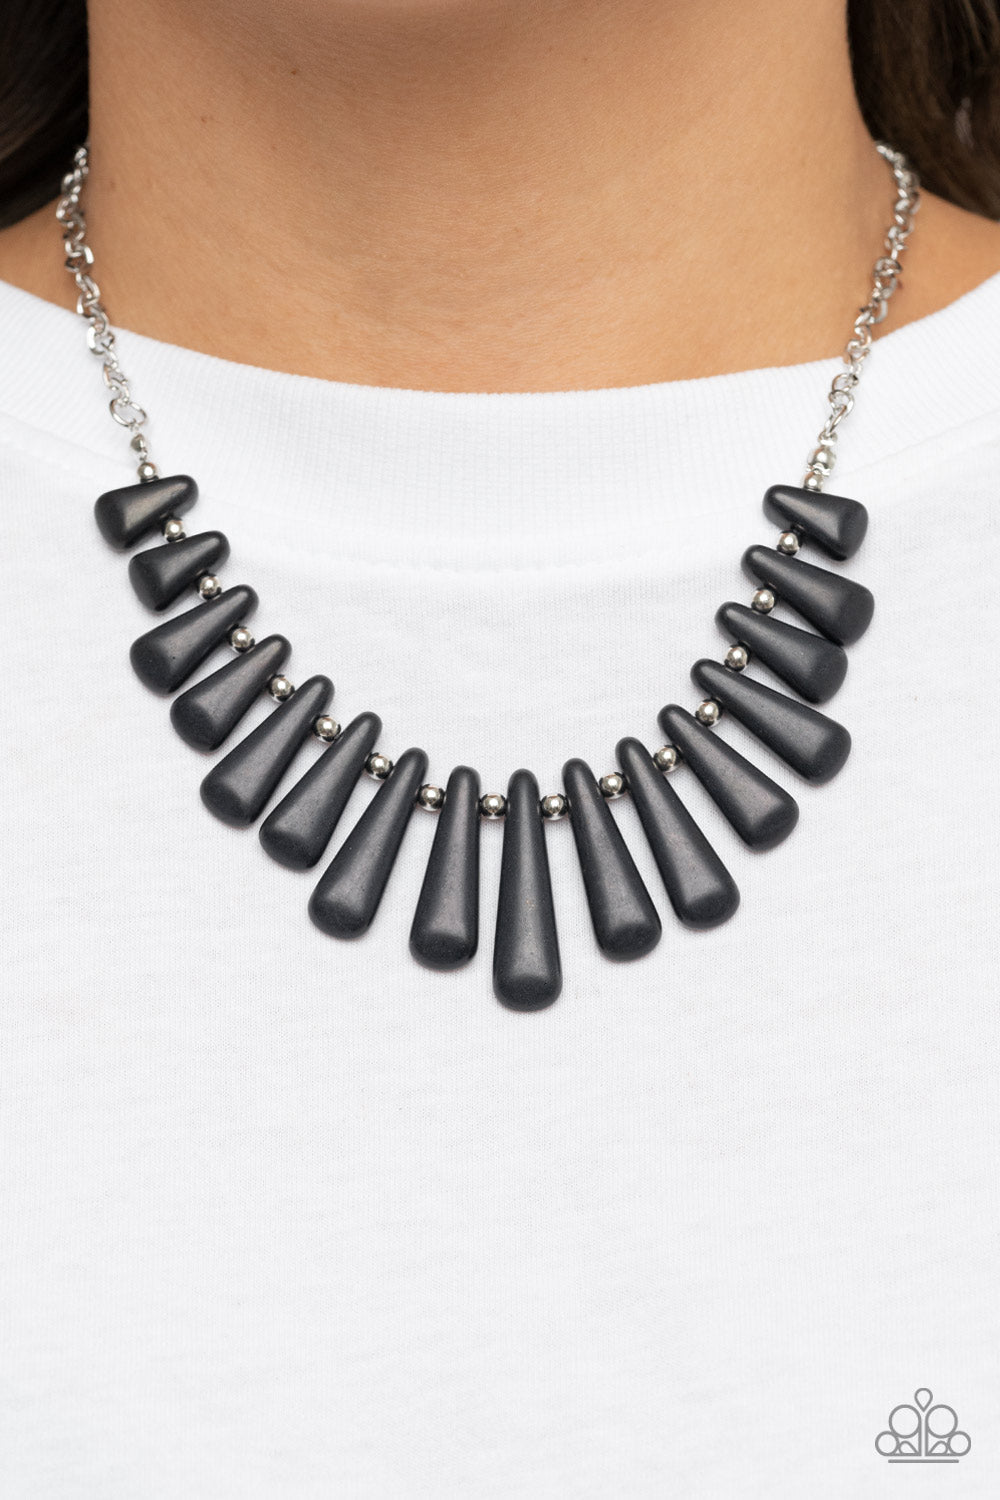 Mojave Empress - Black Triangular Stones/Dainty Silver Beaded Paparazzi Necklace & matching earrings